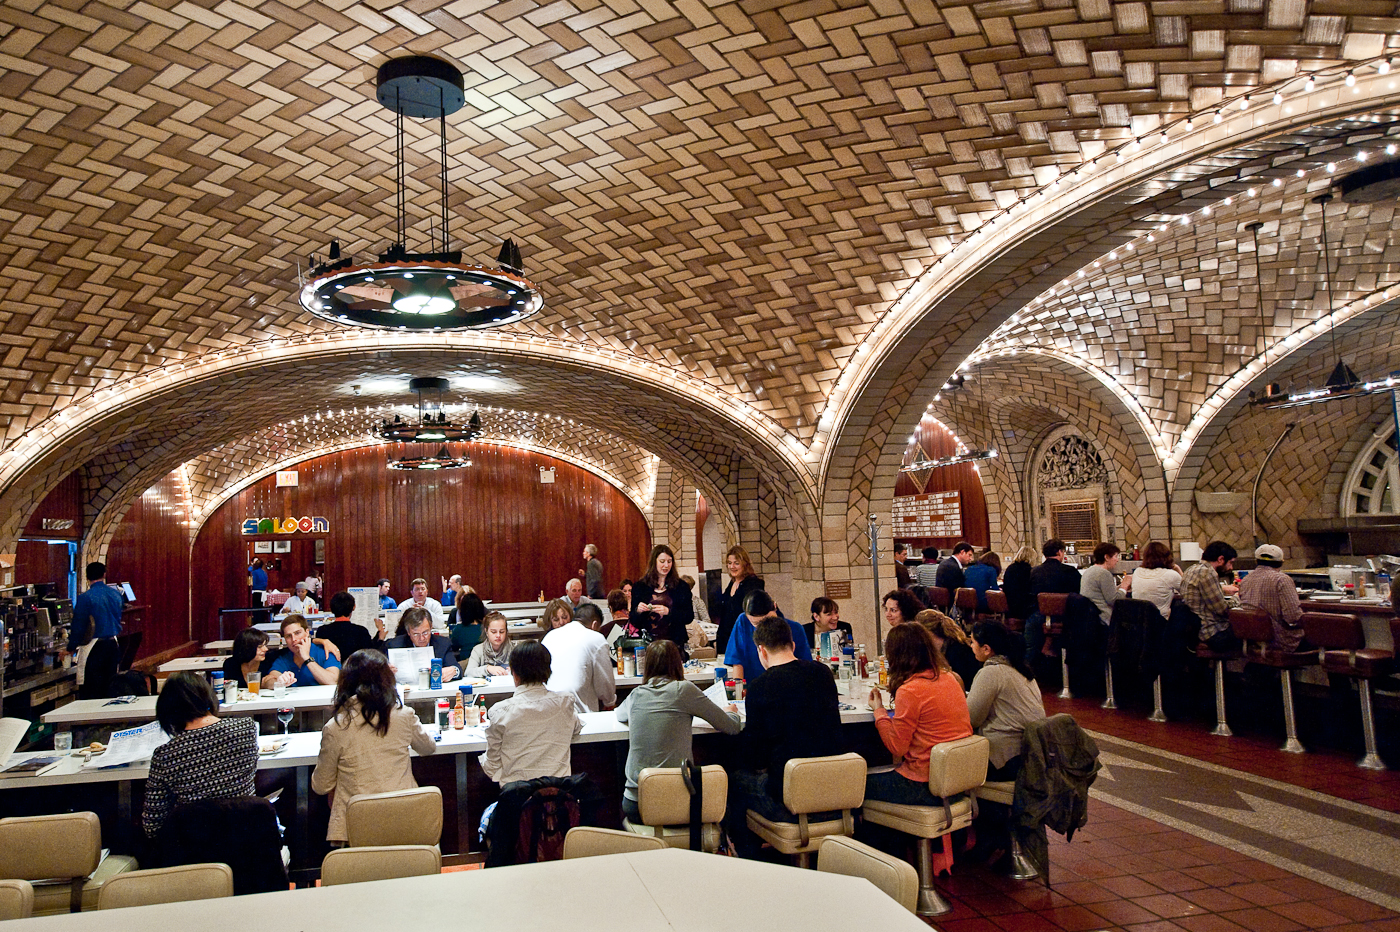 File:The Oyster Bar, Grand Central Terminal, New York City (4056561909).jpg  - Wikimedia Commons